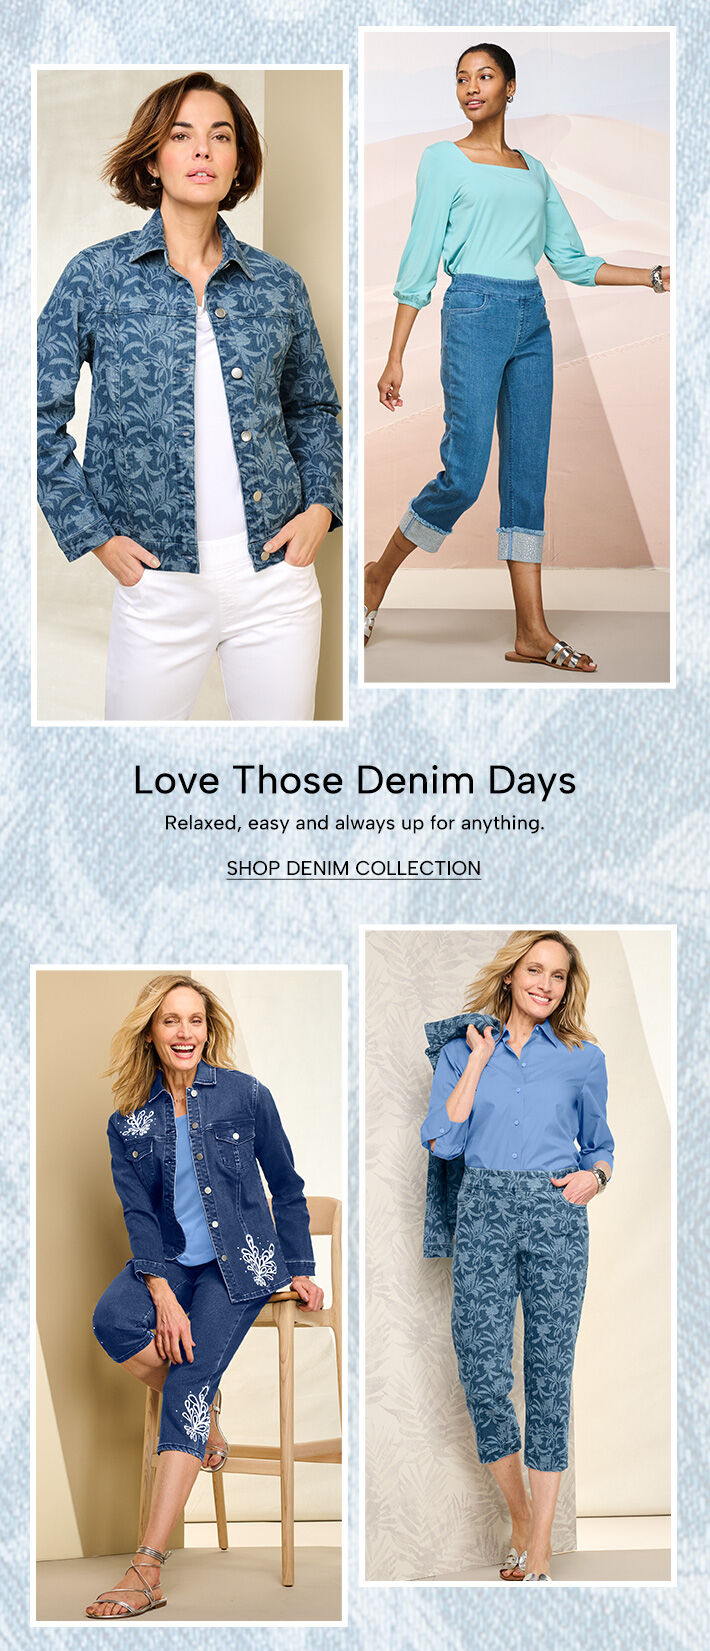 Love those denim days. Relaxed, easy and always up for anything. Shop Denim Collection